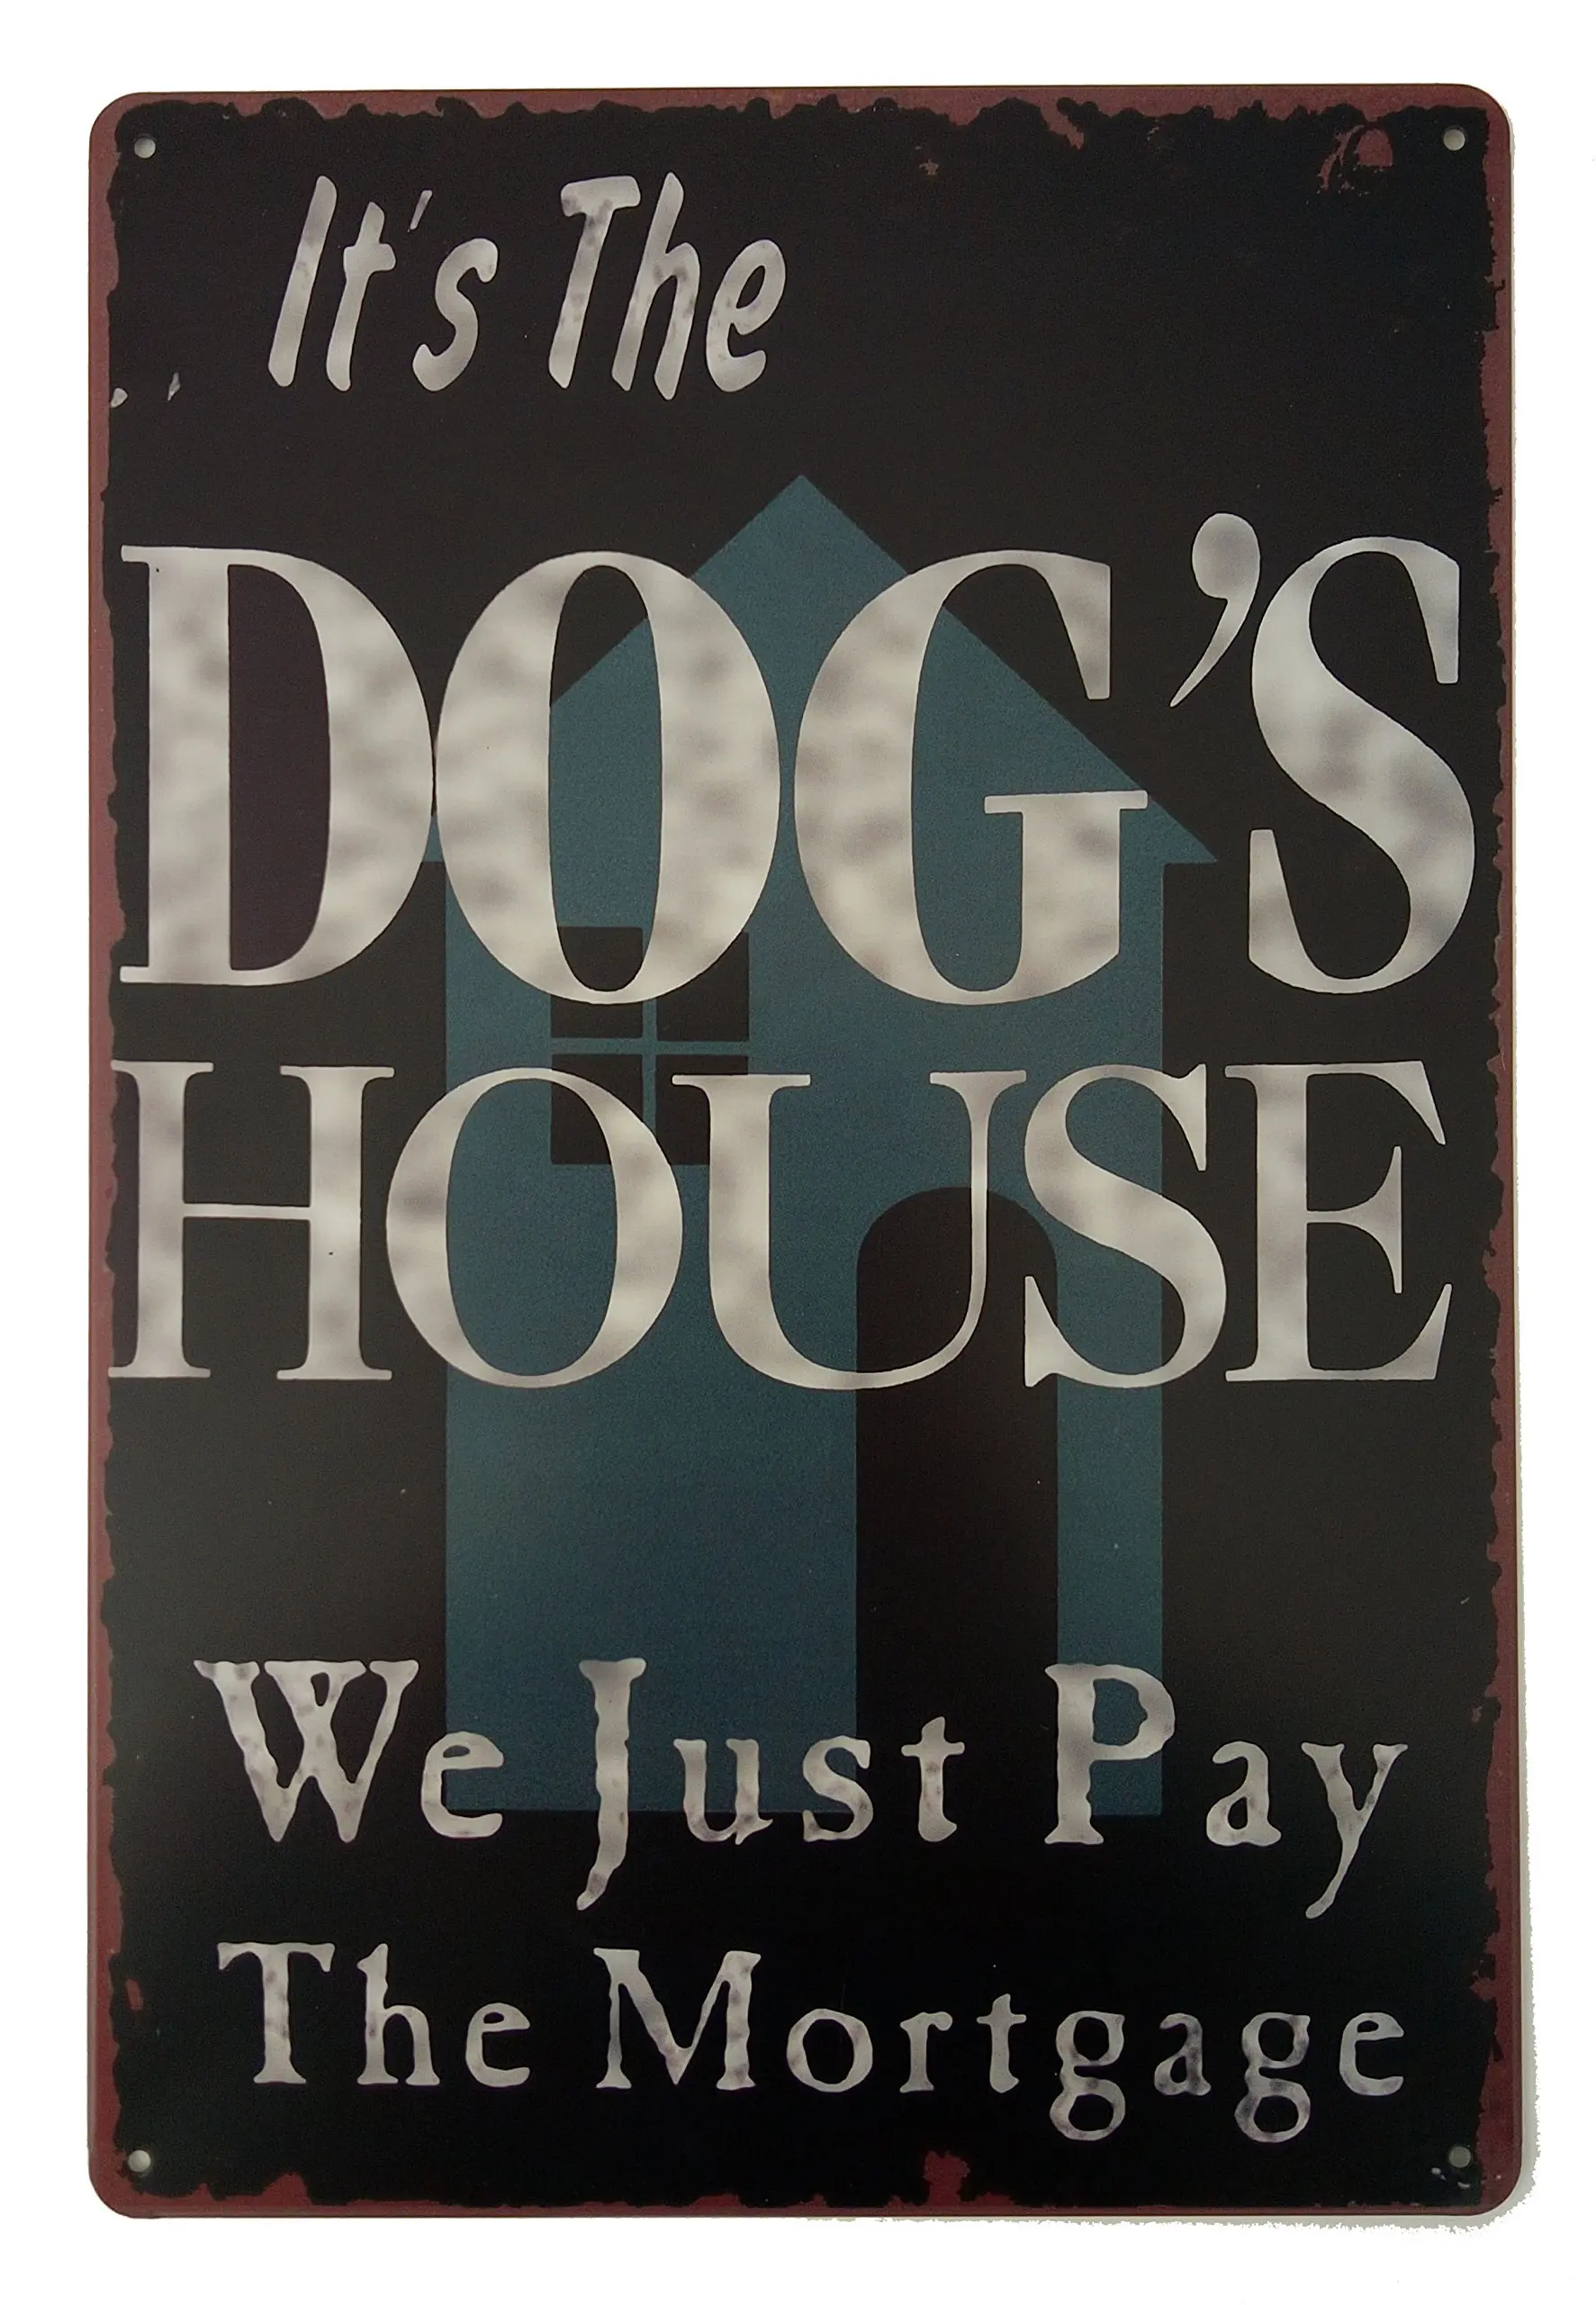 

It's The Dog's House We Just Pay The Mortgage Vintage Tin Sign Wall Decor 20 X 30 cm